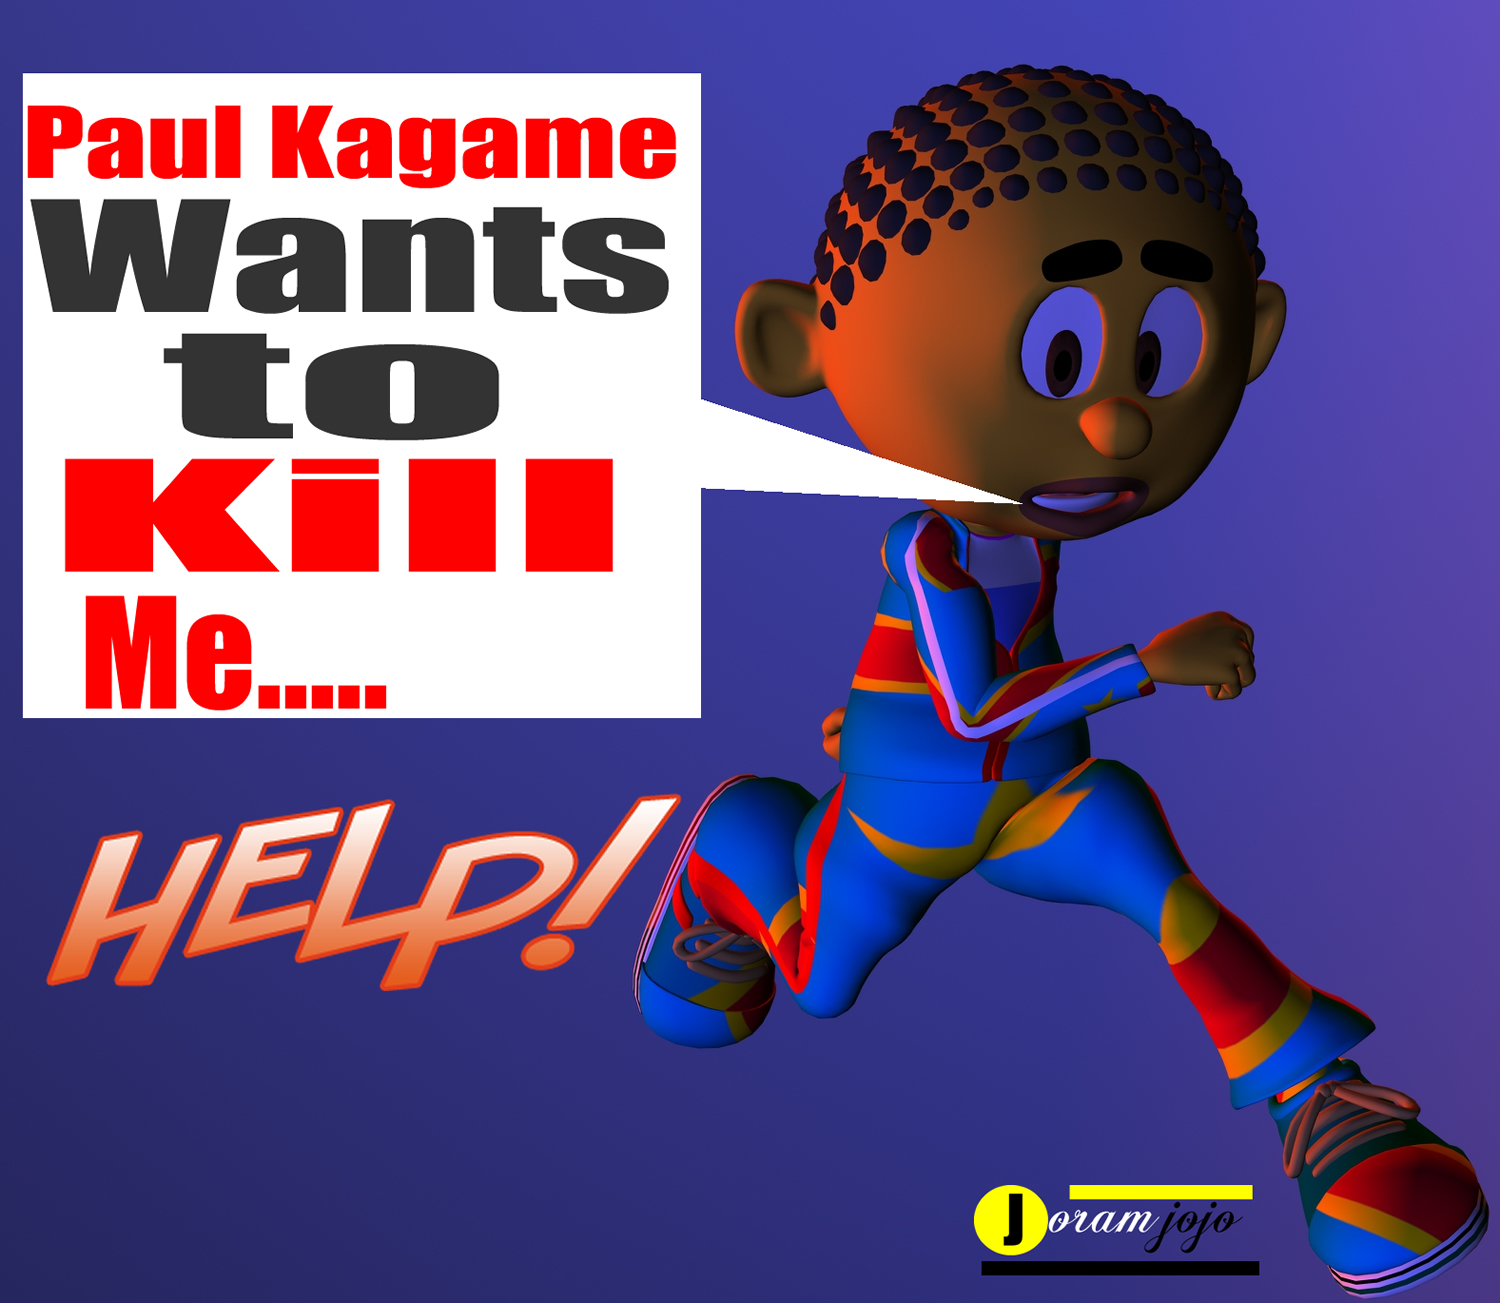 Paul Kagame kills with Impunity and Rewarded for it